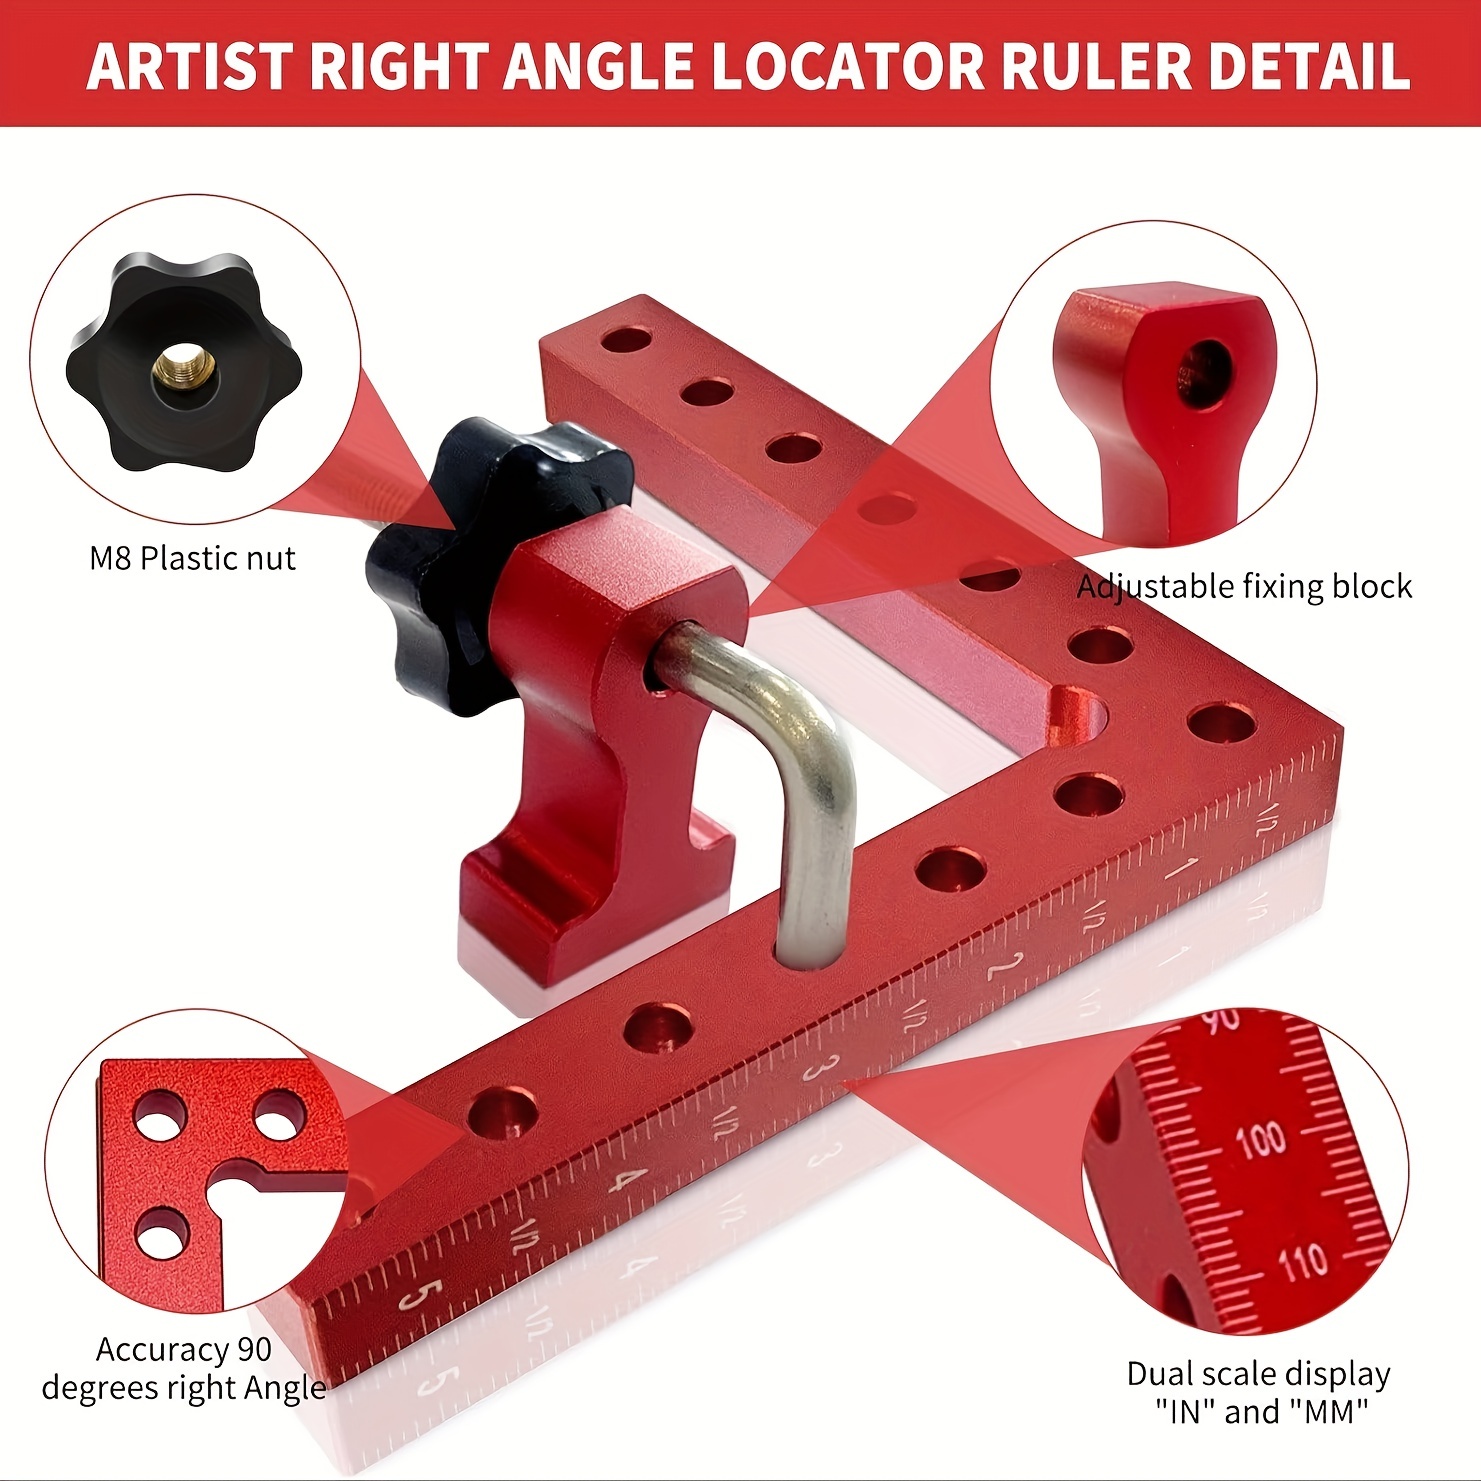 HARDELL 90 Degree Positioning Squares Right Angle Clamps 5.5 x 5.5(14 x  14cm) Aluminum Alloy Woodworking Carpenter Corner Clamping Square Tool for